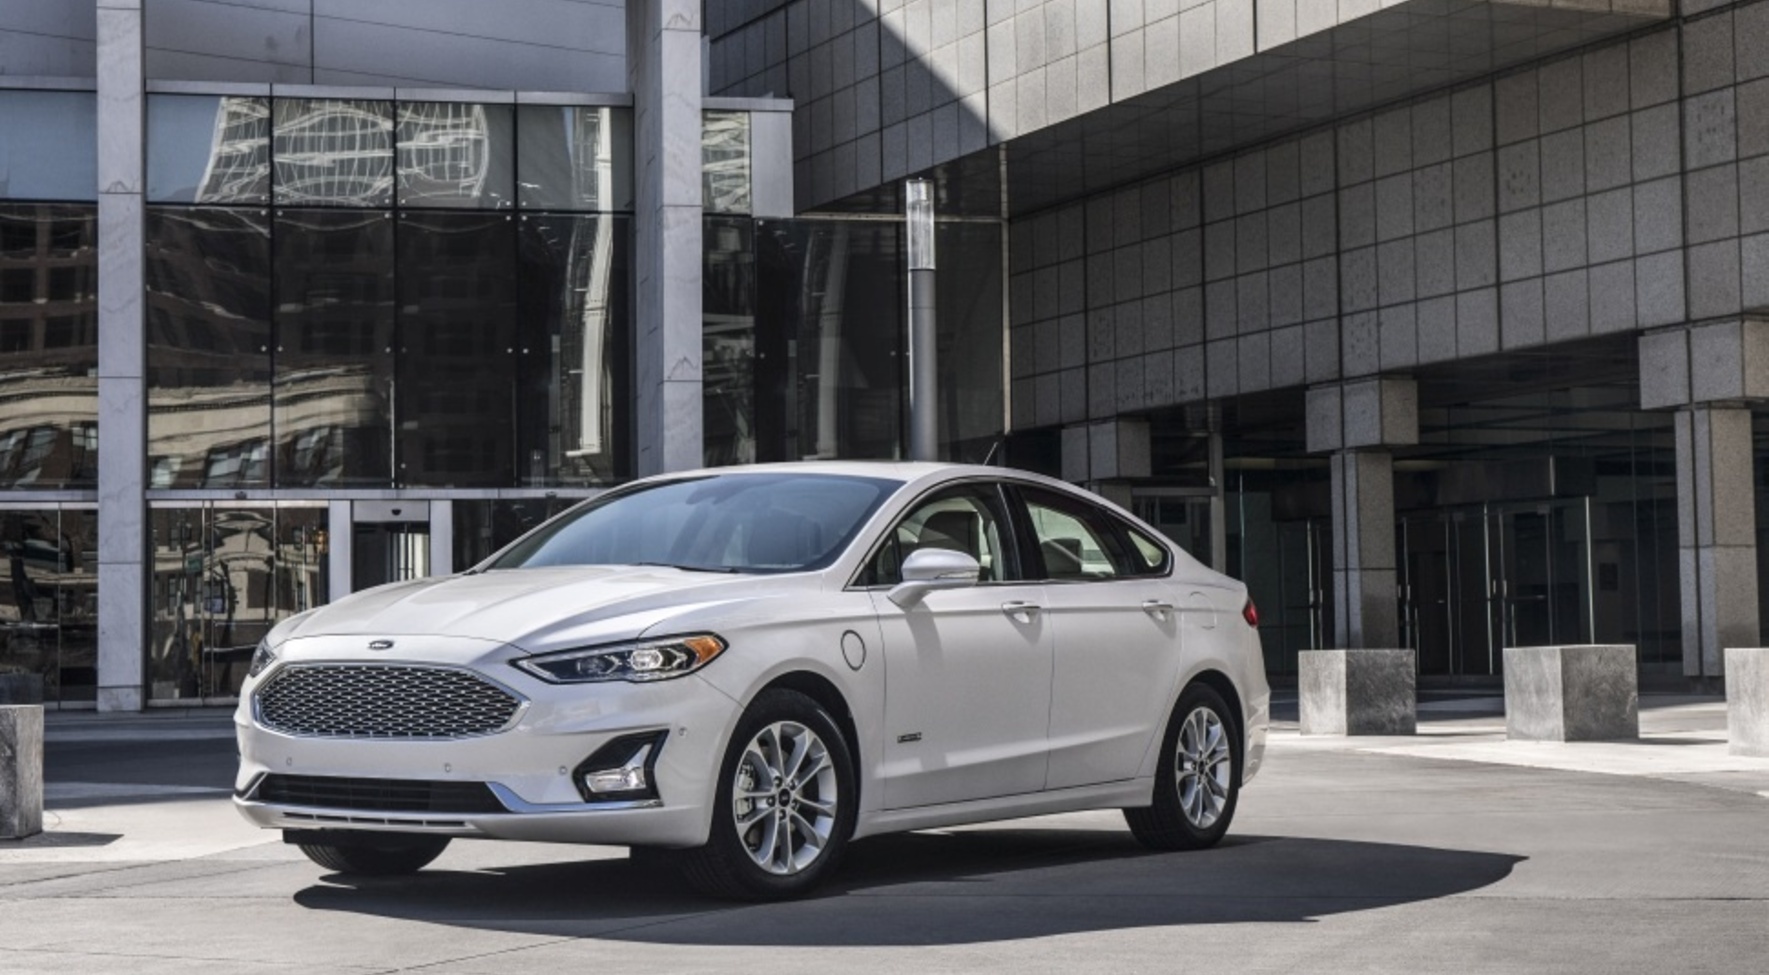 Ford Fusion II (facelift 2018) 2.7 EcoBoost V6 (325 Hp) AWD SelectShift 2018, 2019, 2020, 2021 